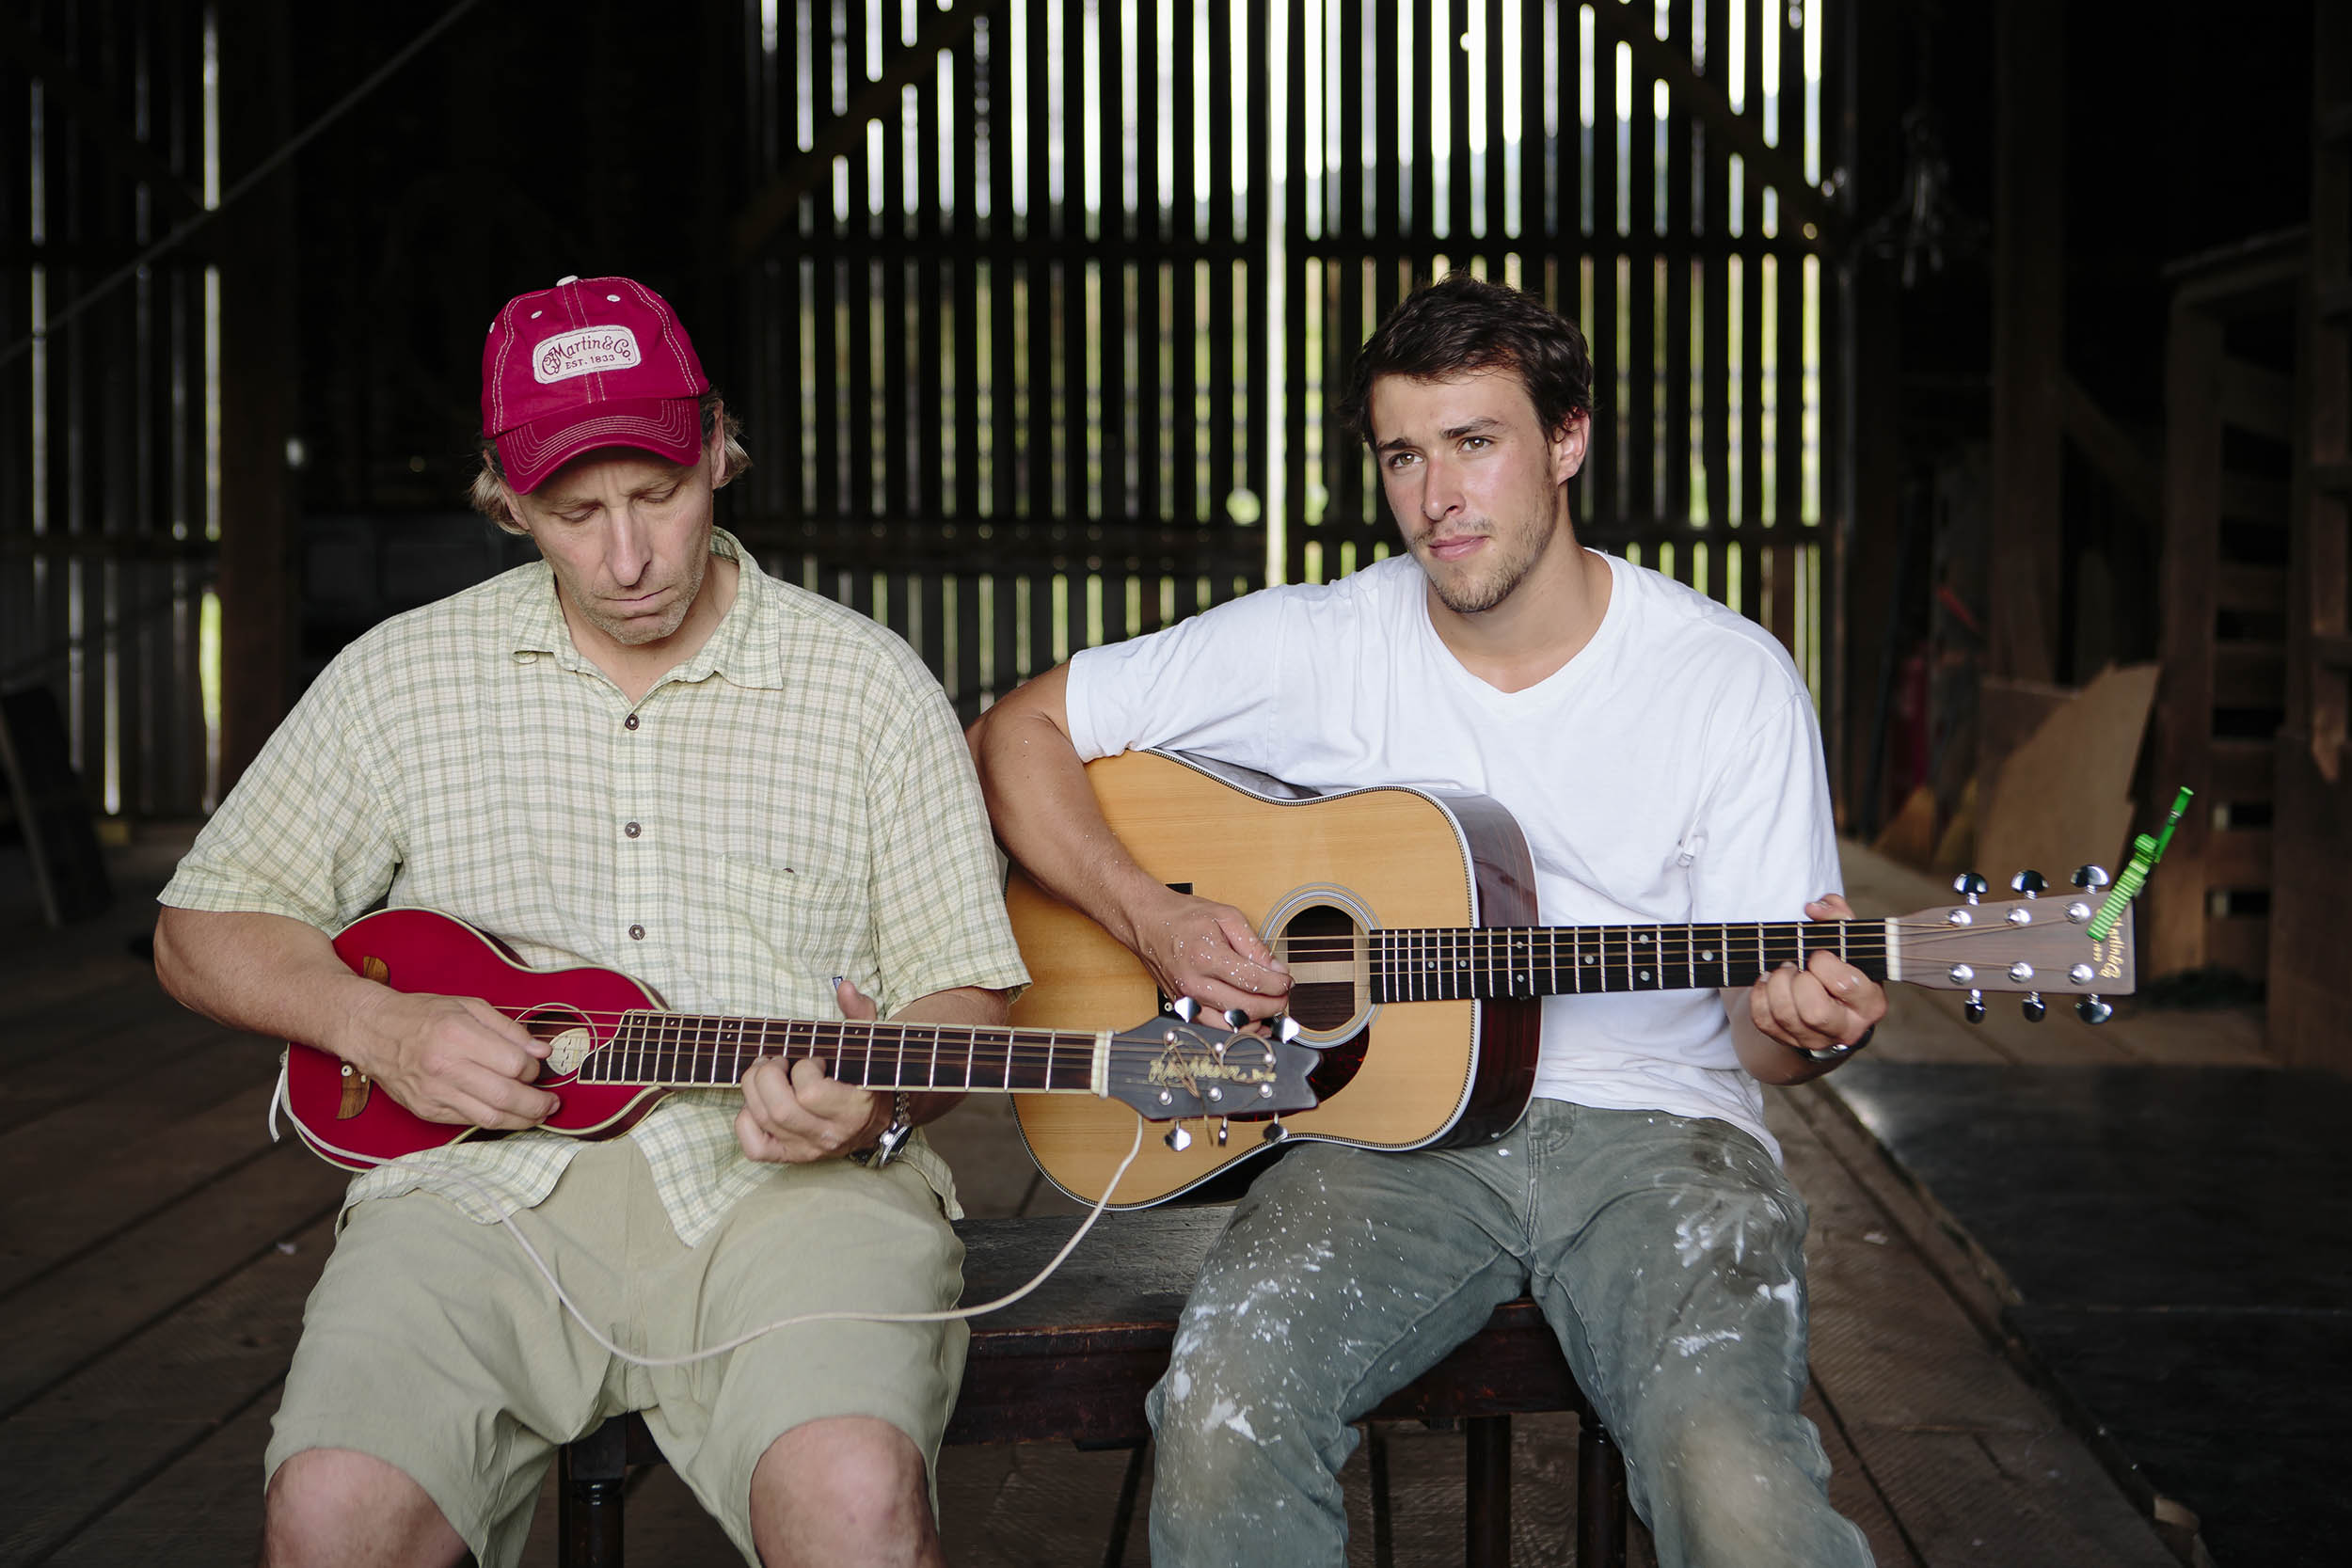 Bill and Will overman sitting on a bench together playing musical instruments